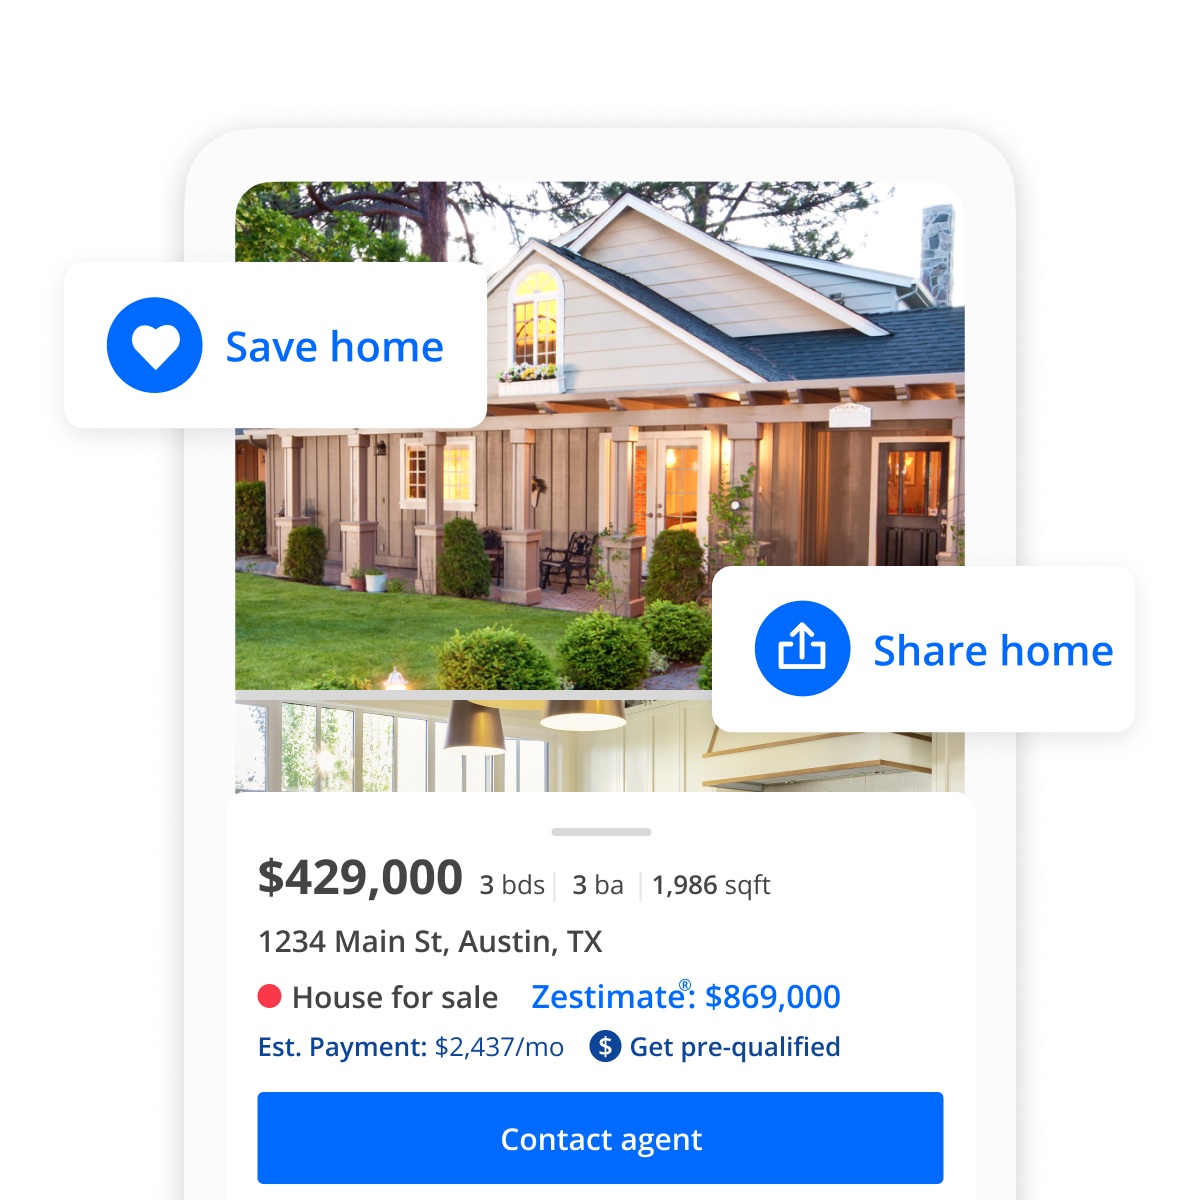 Zillow home search tool: saving and sharing homes.